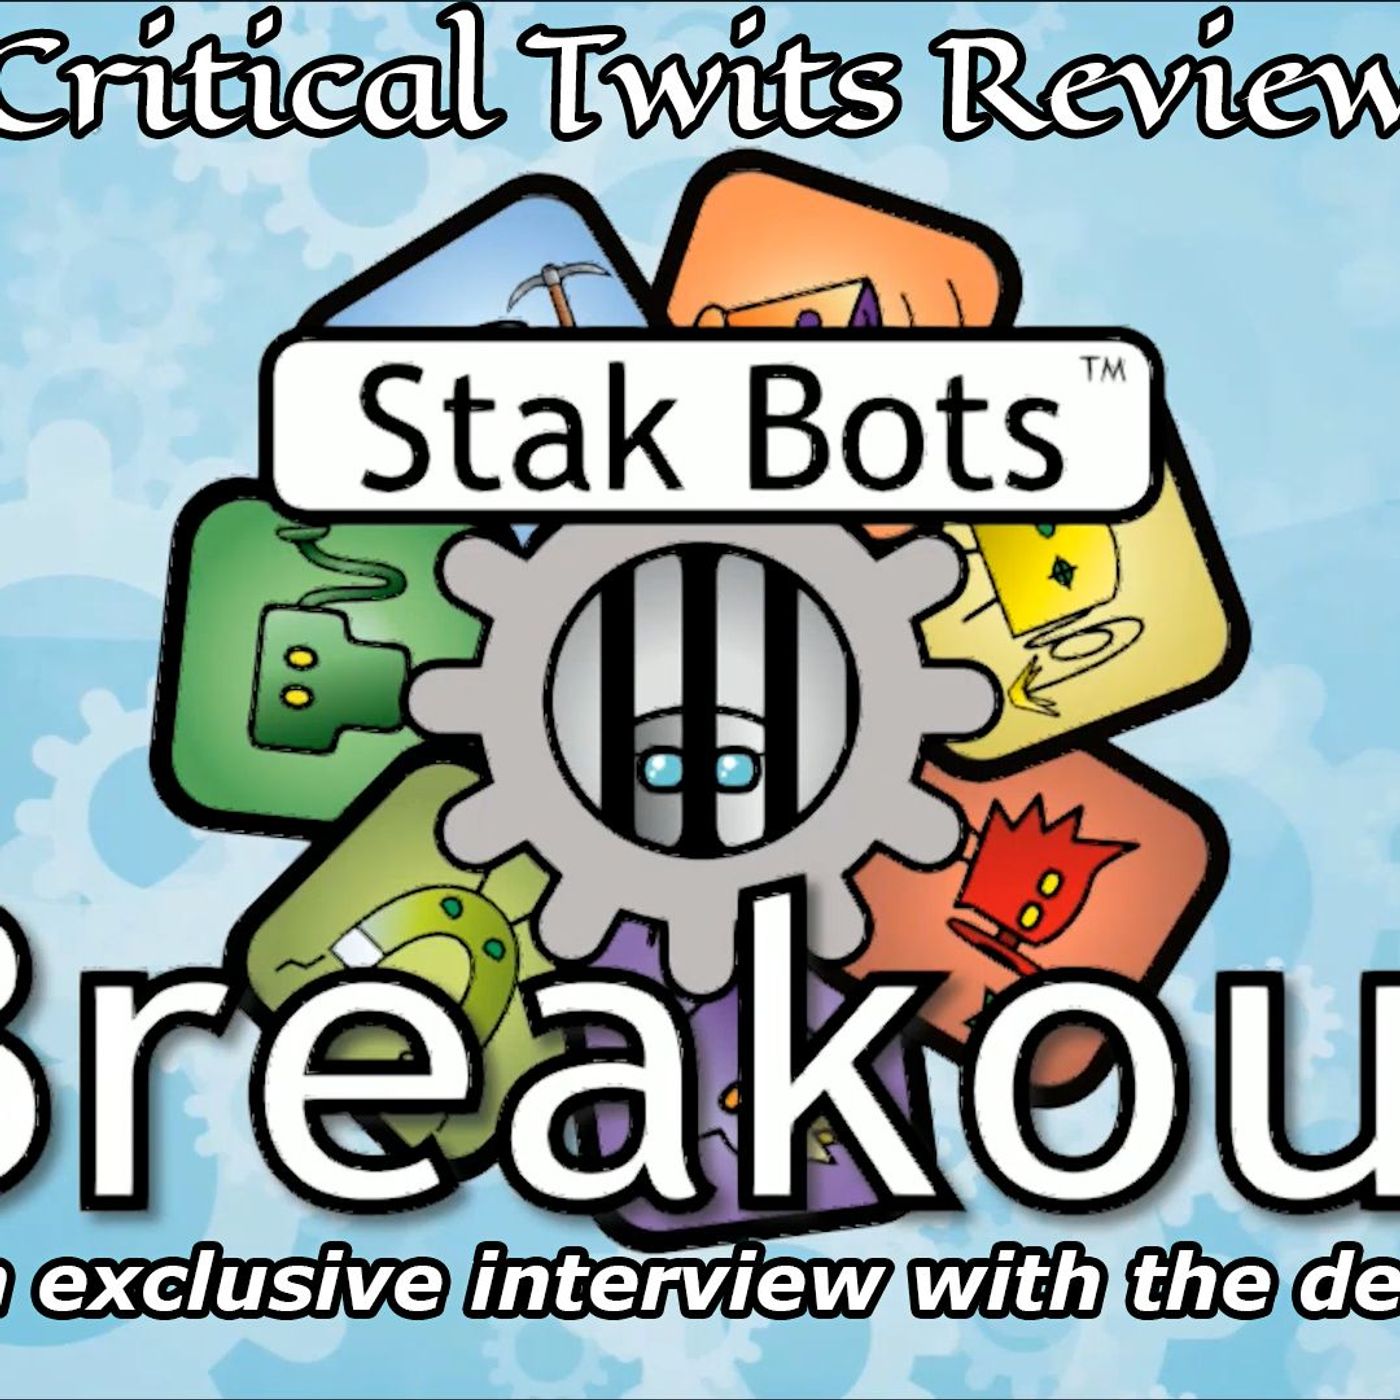 Steam Greenlight - Stak Bots Breakout Review & Exclusive Interview With Dogeared Games